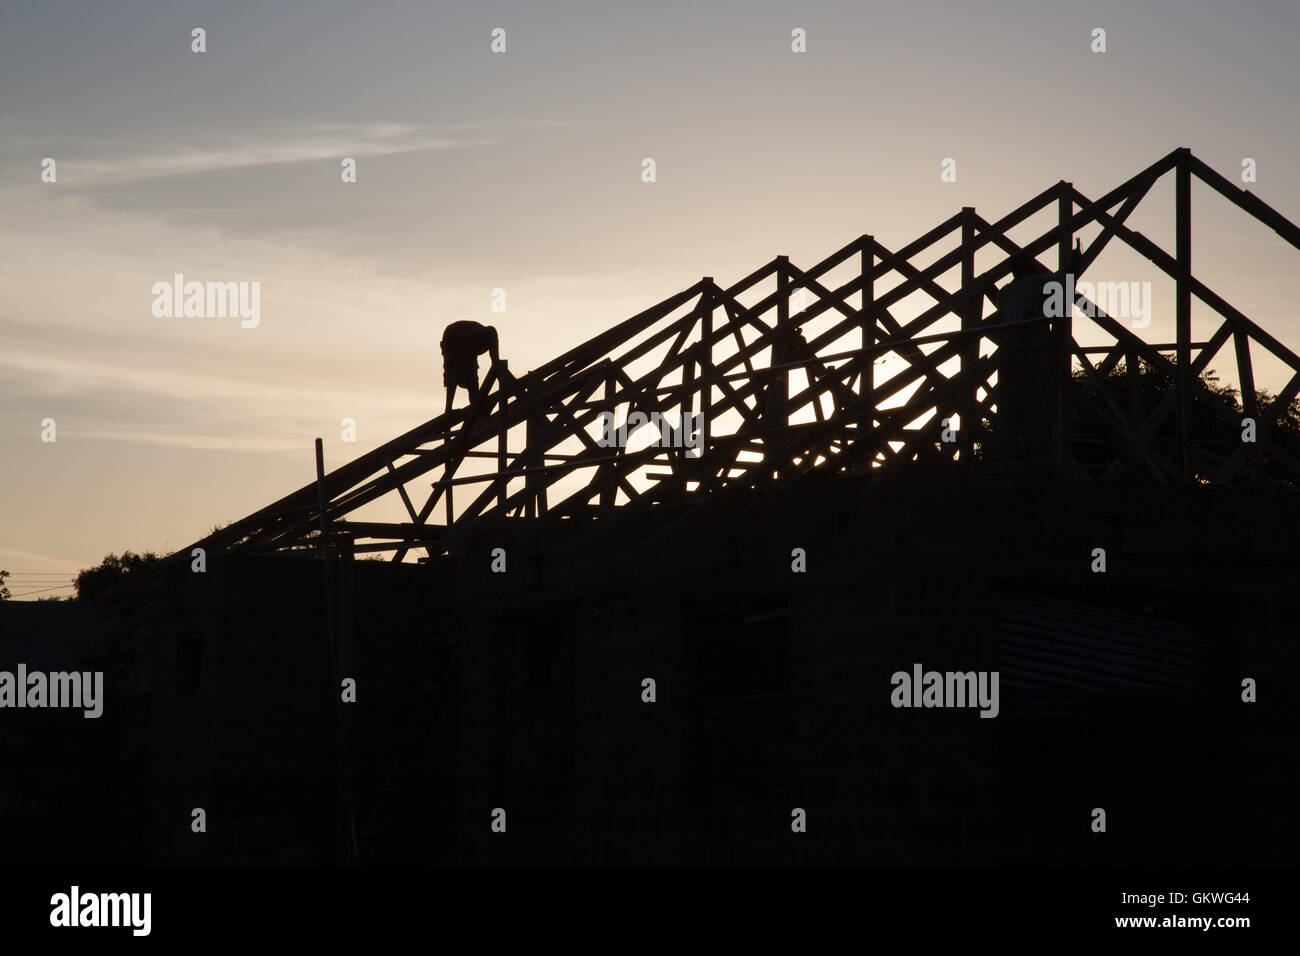 Men work on a house at dusk in moshi, Tanzania Stock Photo